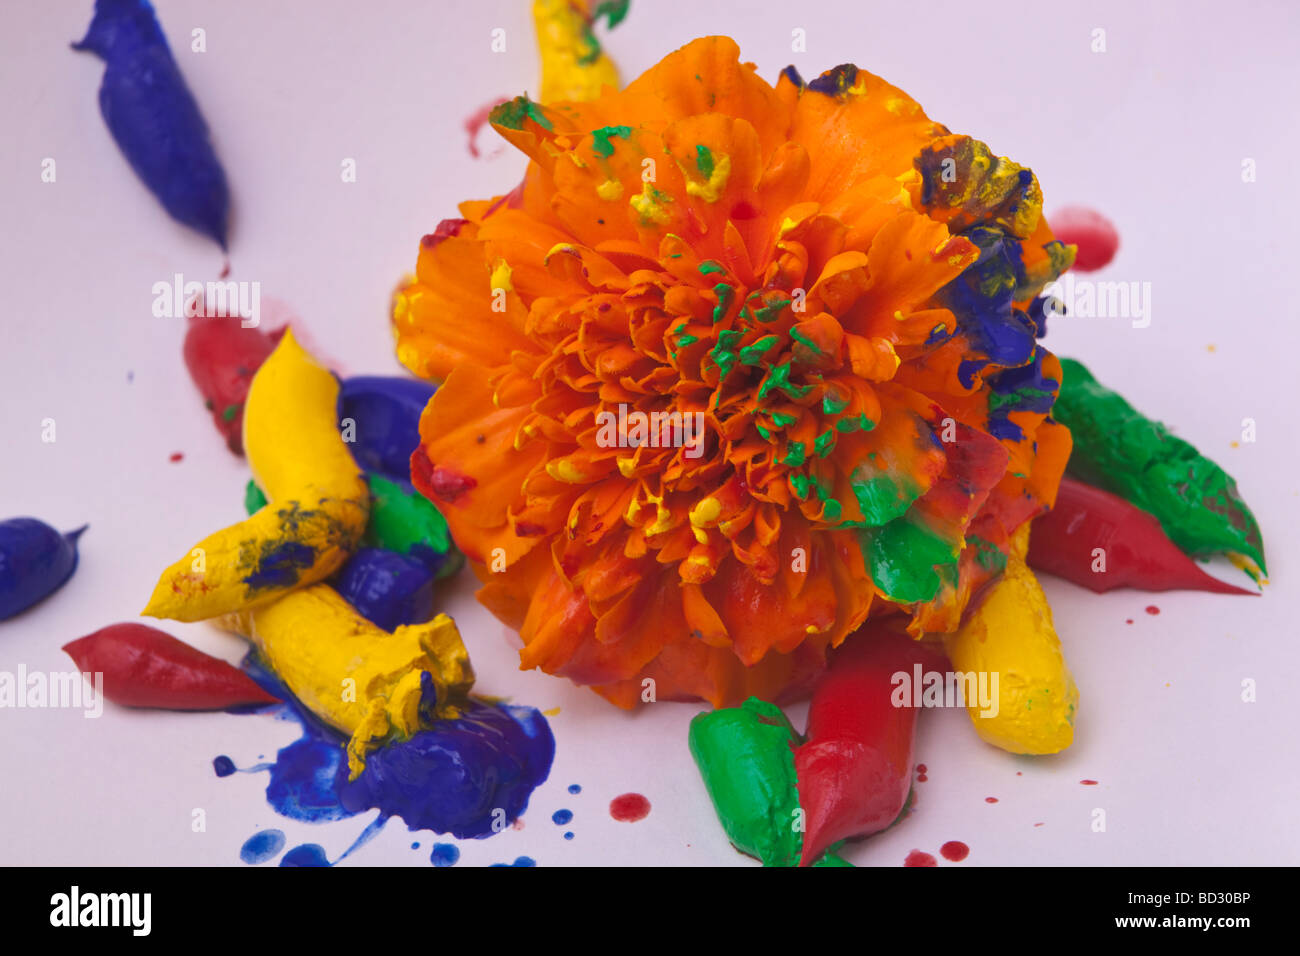 A simple orange cut flower surrounded by paint with mixed paint on the petals Stock Photo